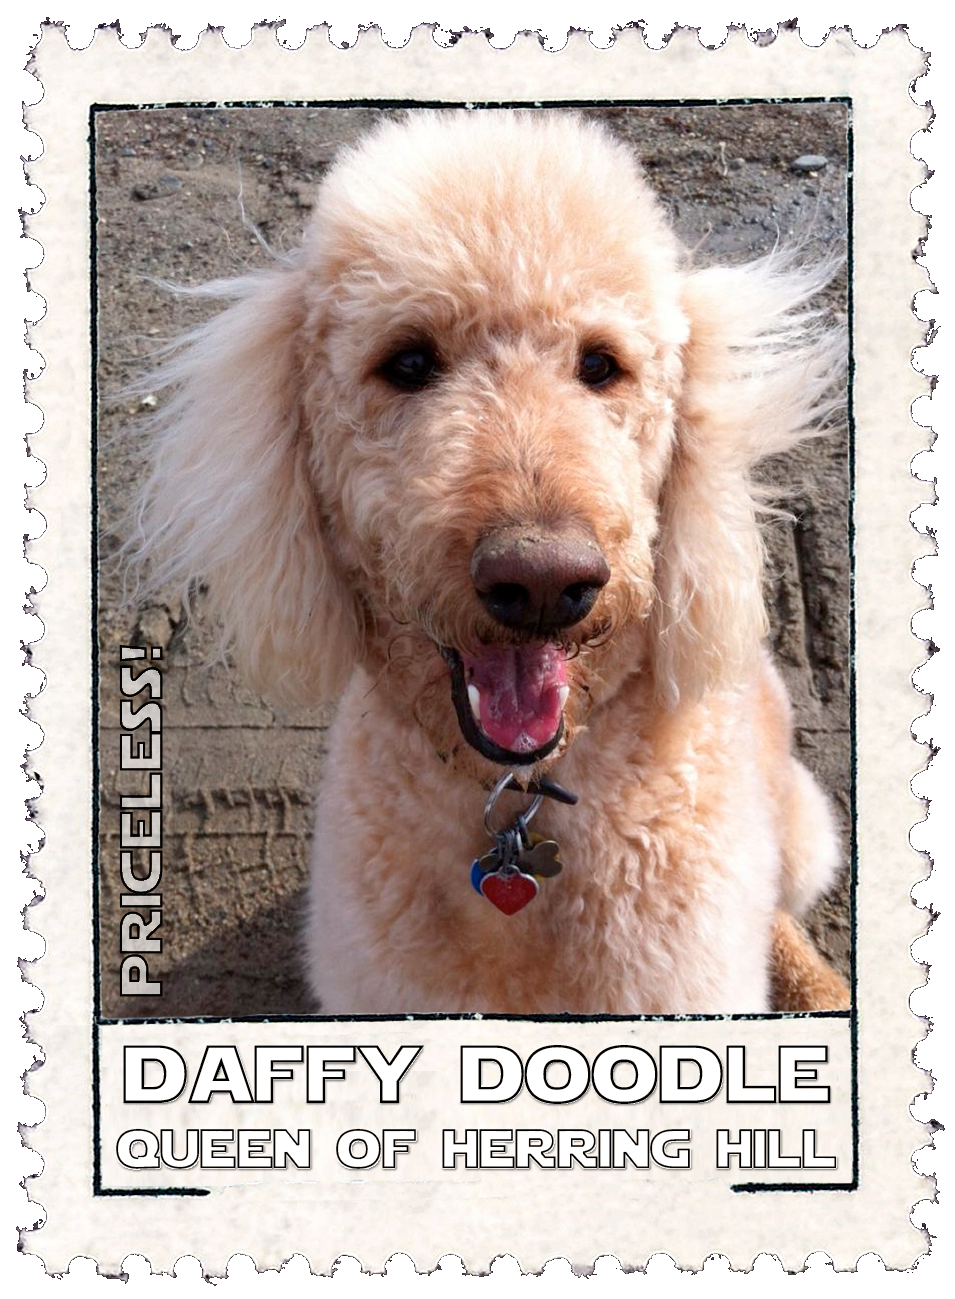 Daffy's stamp from last year, a tribute to her wonderfulness.